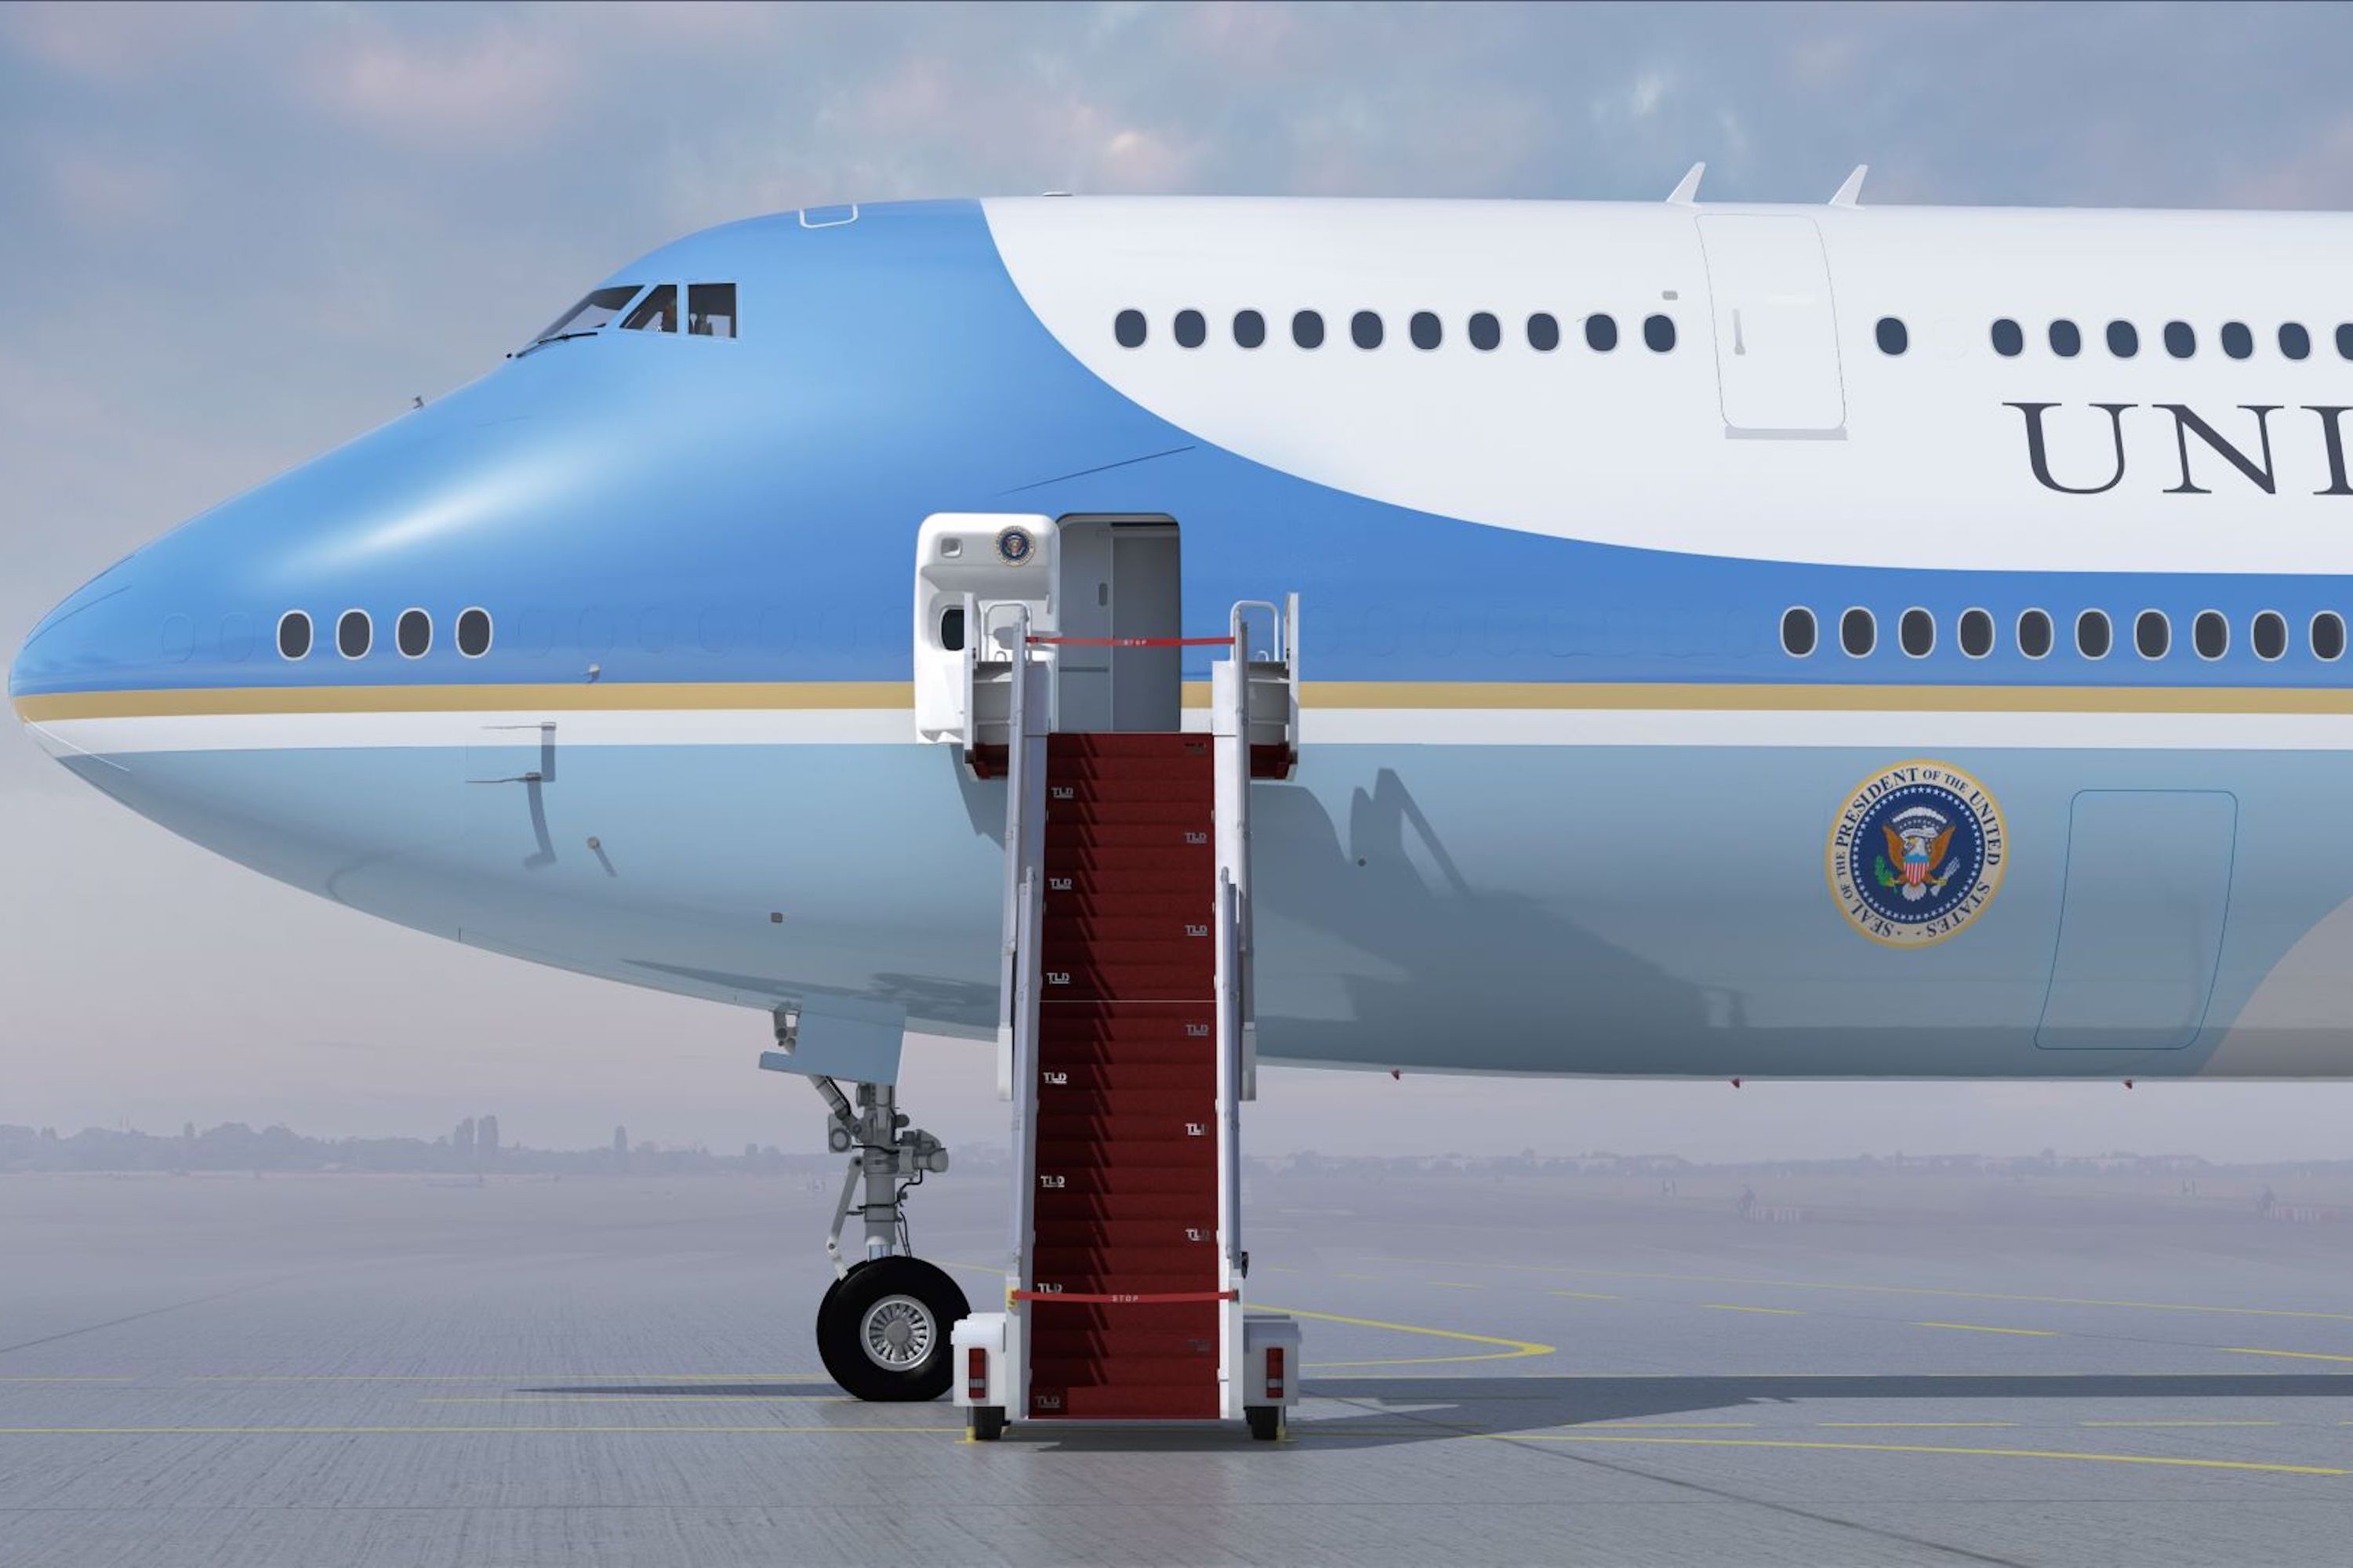 VC-25B: Everything We Know About The New Air Force One Boeing 747 